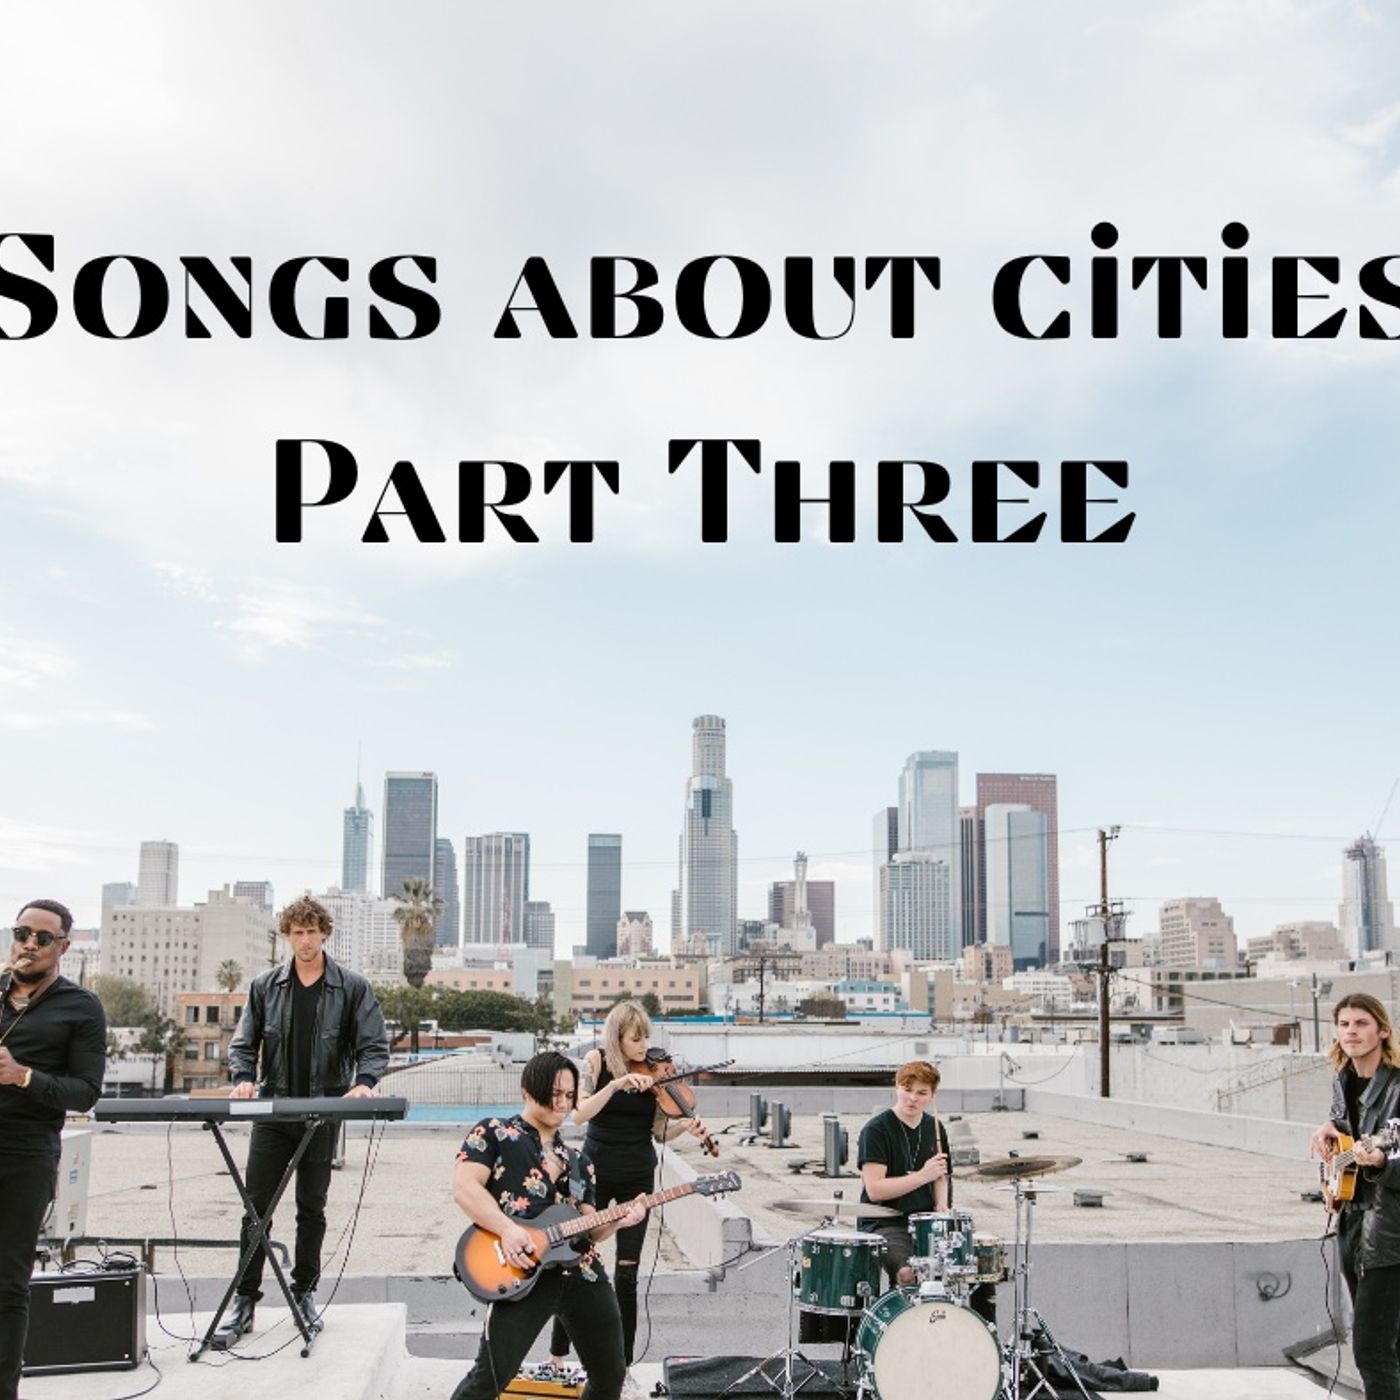 Songs about cities part 3